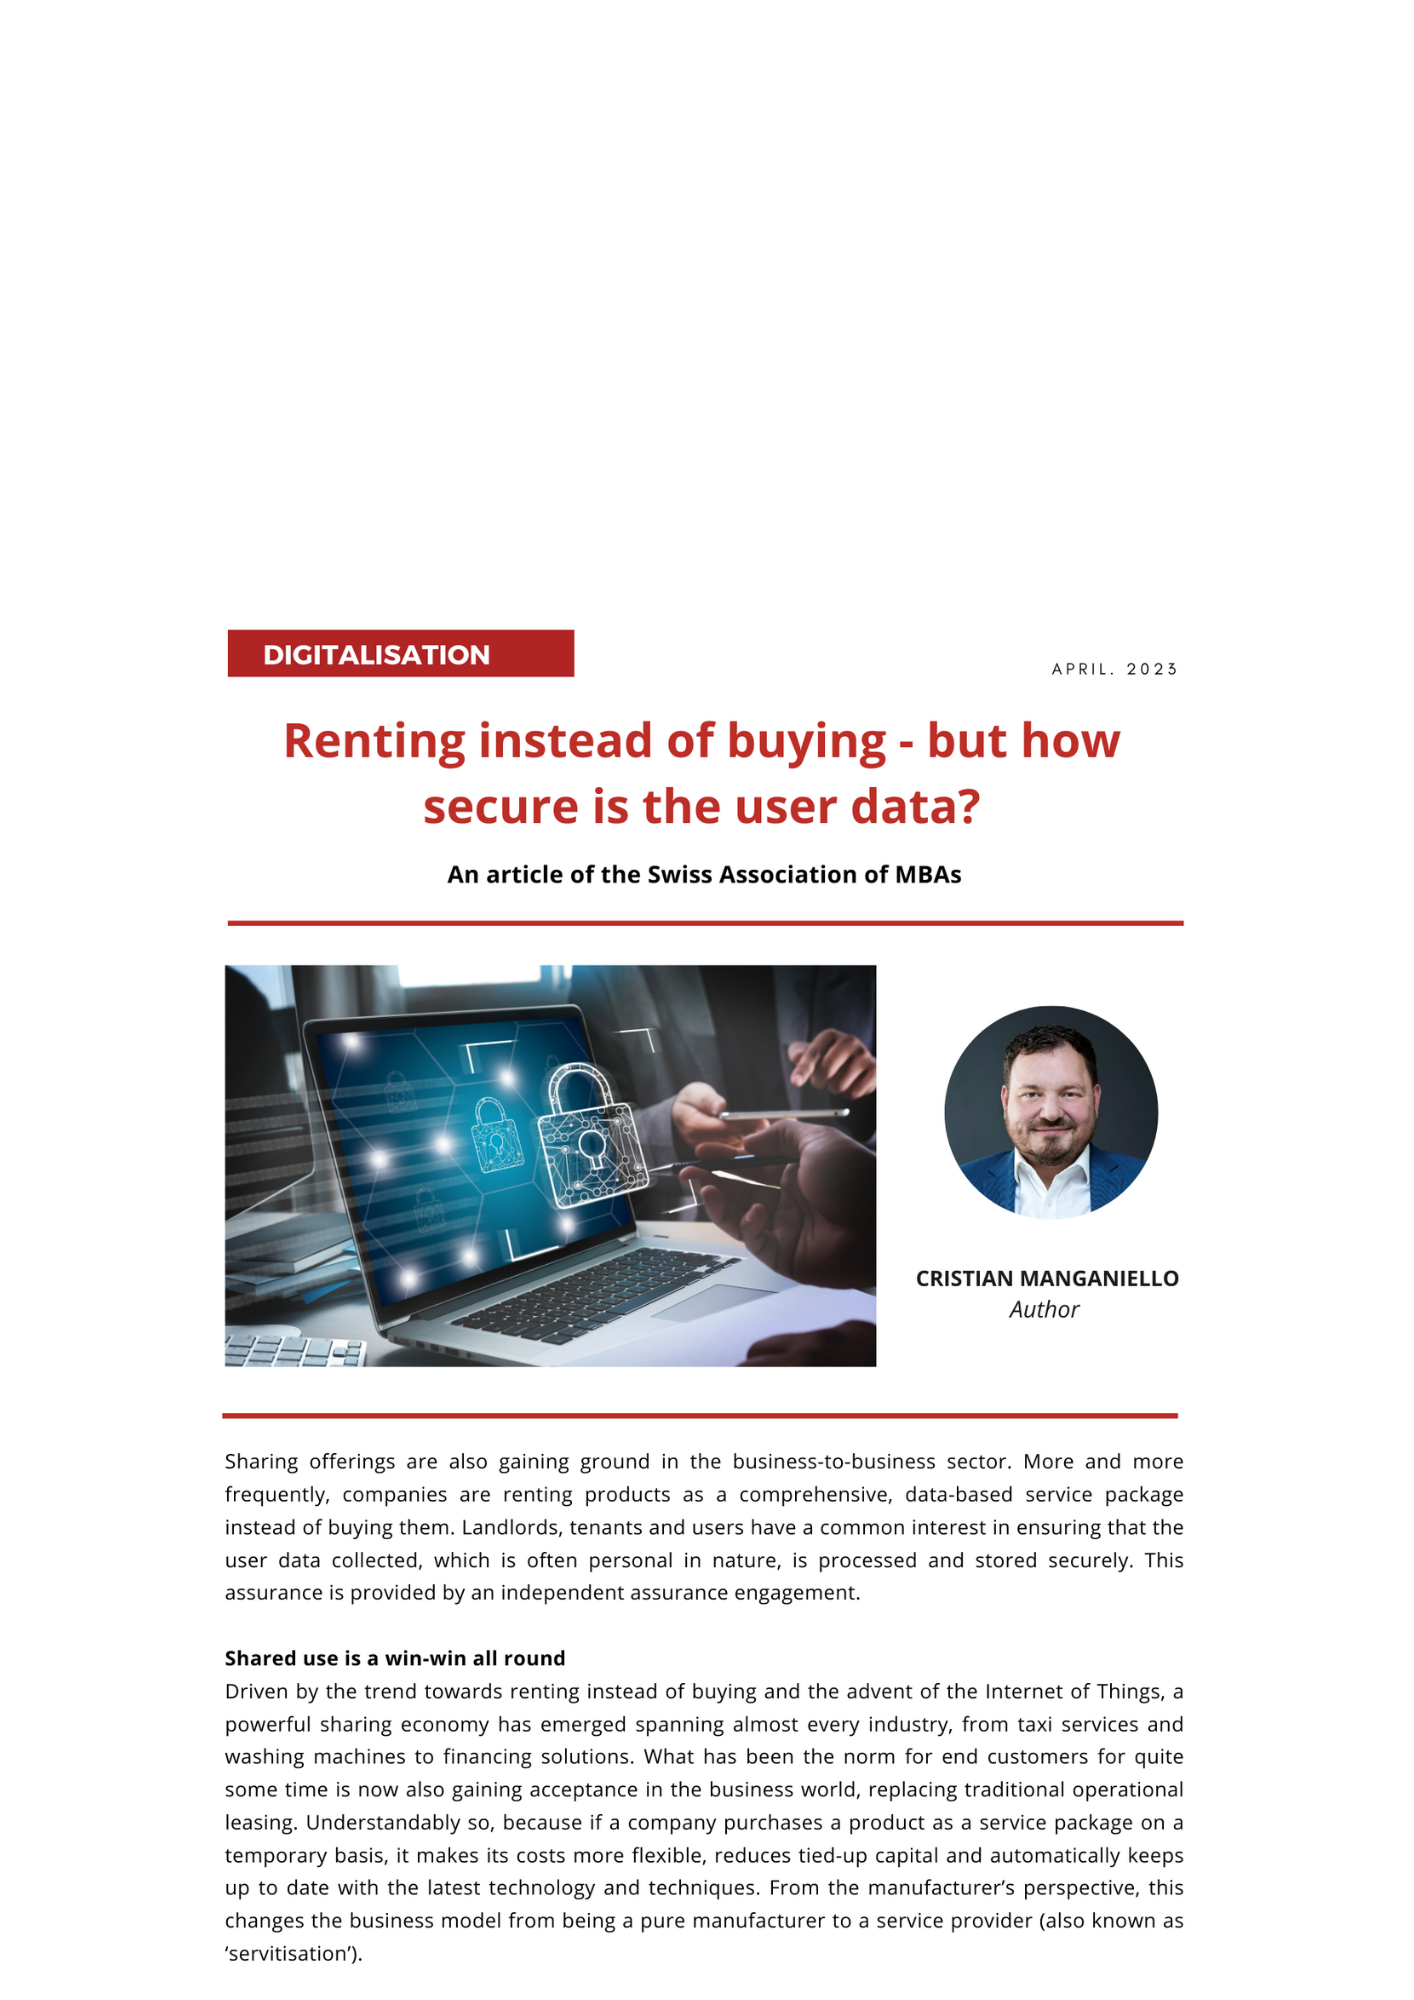 Renting instead of buying – but how secure is the user data?